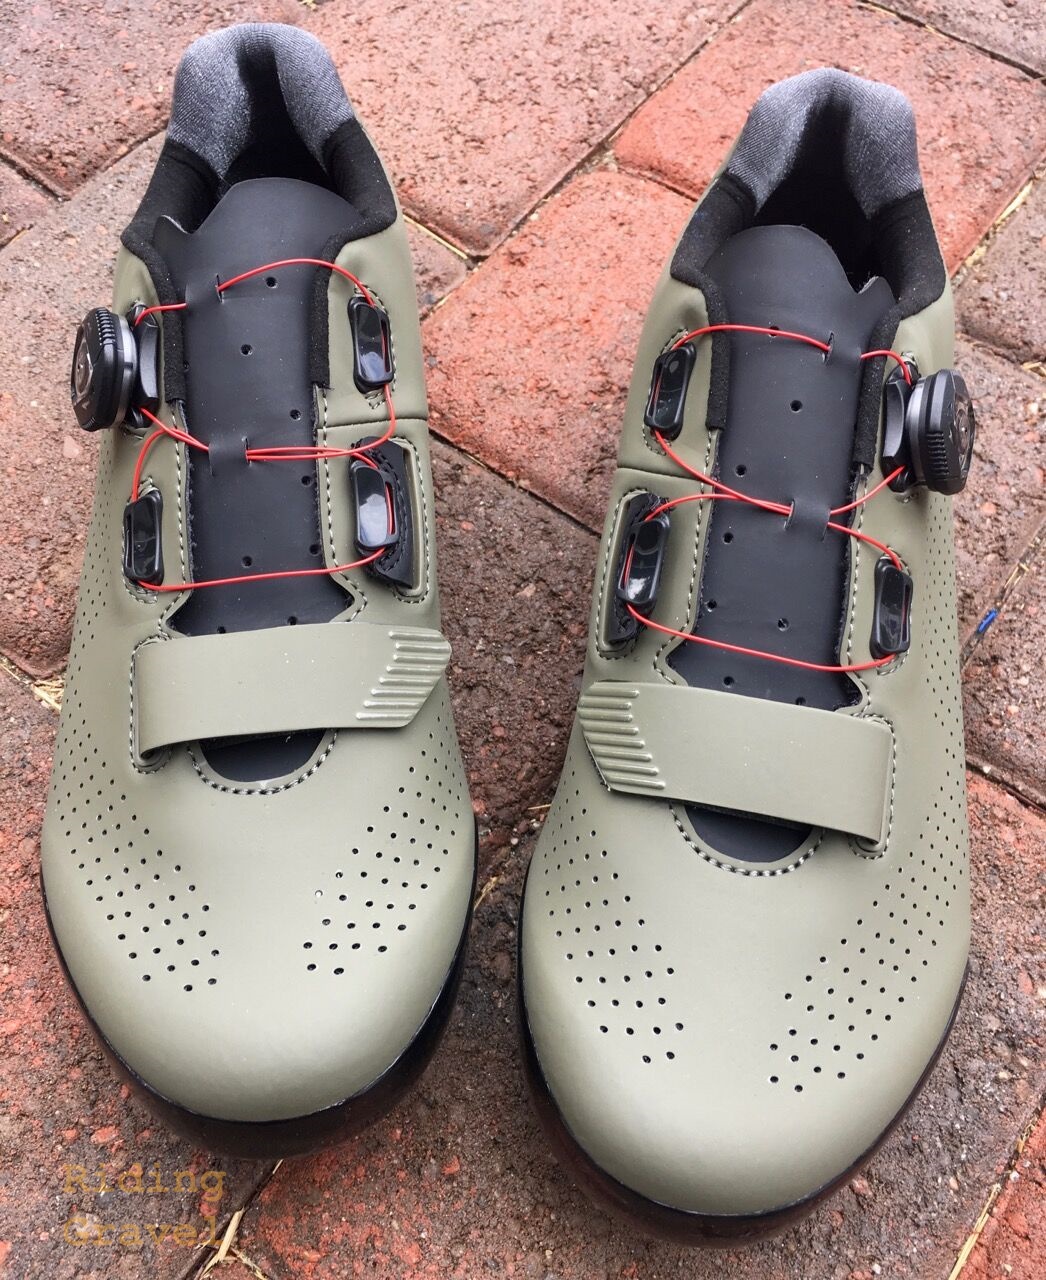 Giant Charge Elite Shoes: Quick Review 